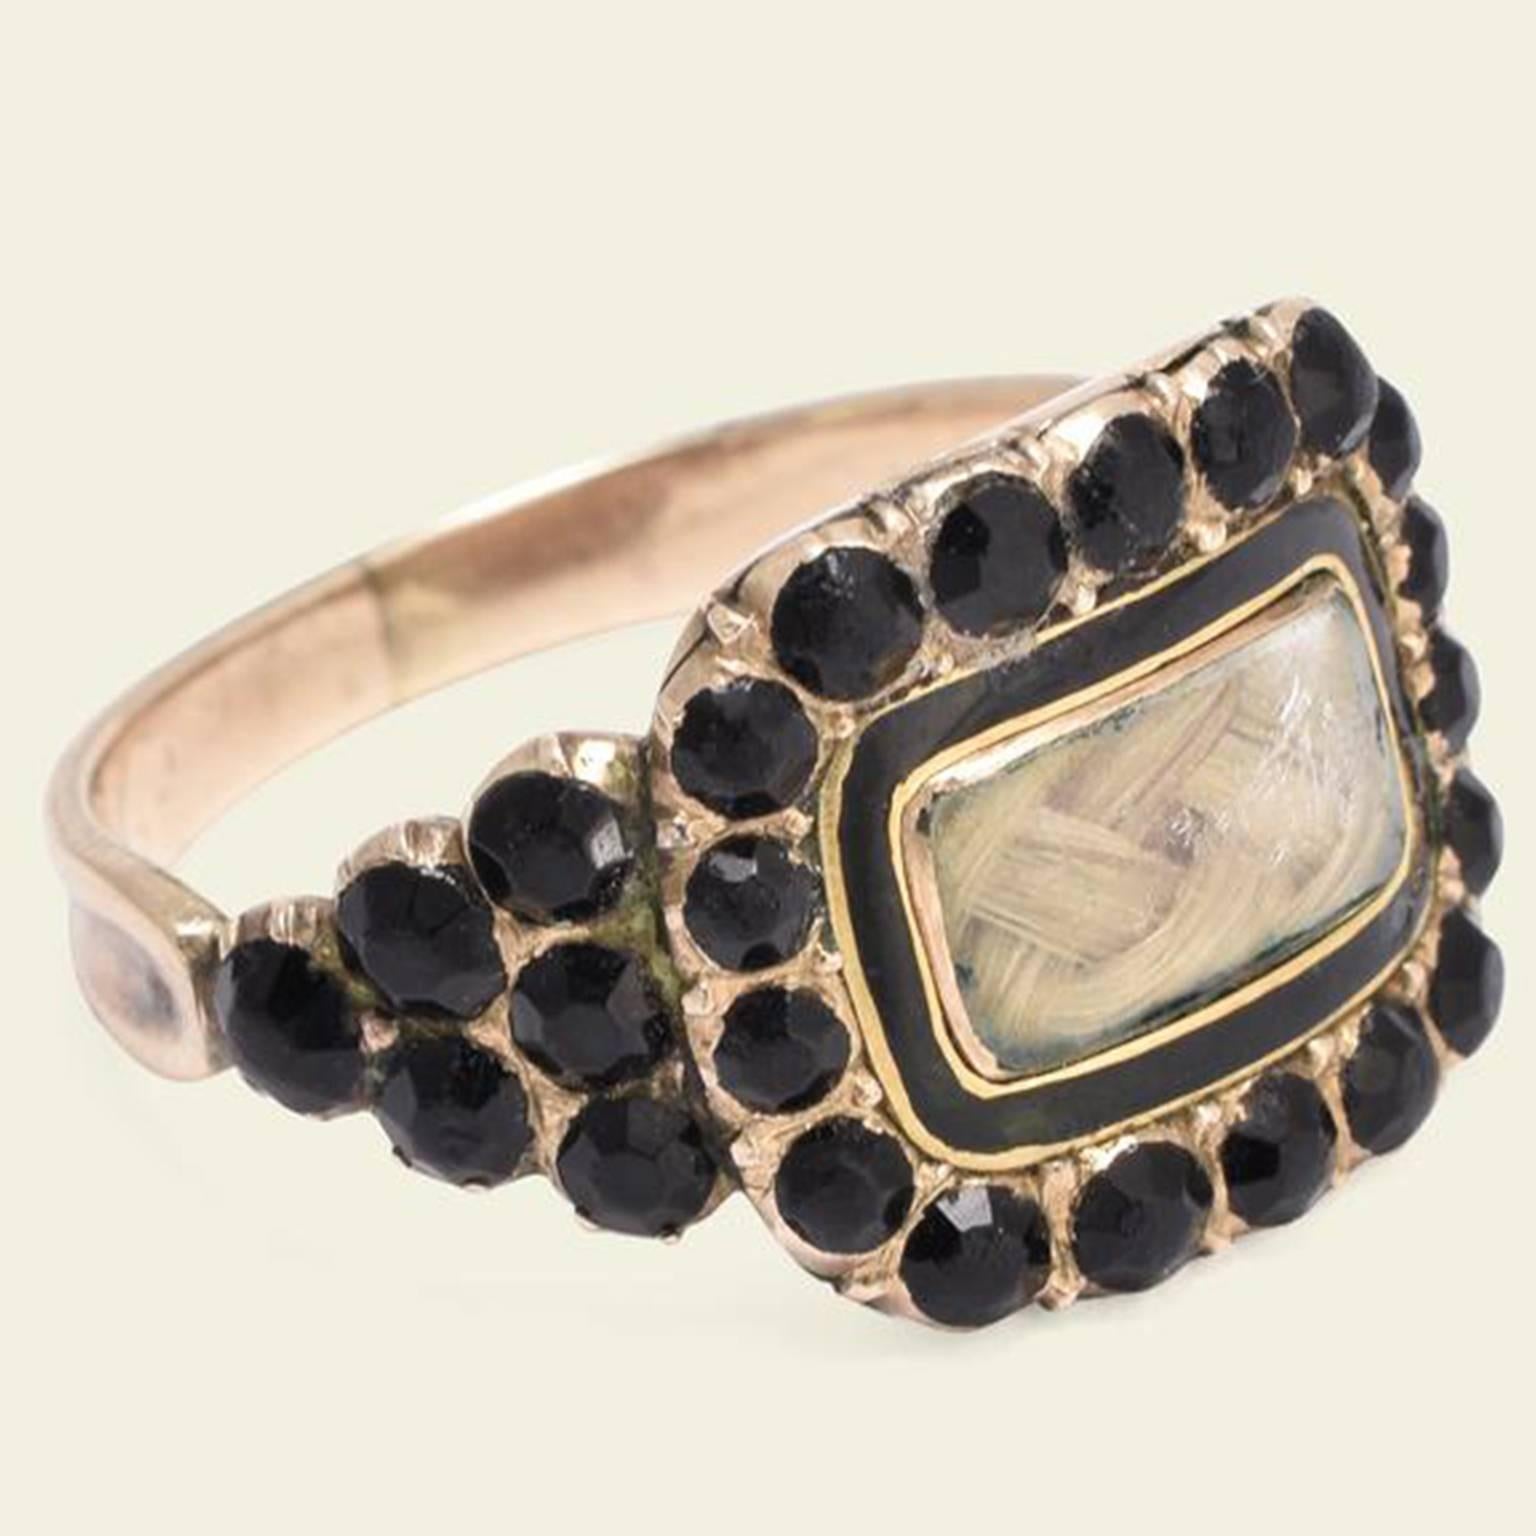 In the first stages of mourning, the bereaved wore only black, so any jewelry also had to be dark-colored and preferably matte. Jet, mined in the Yorkshire town of Whitby, fulfilled these requirements for mourning jewelry extraordinarily well and